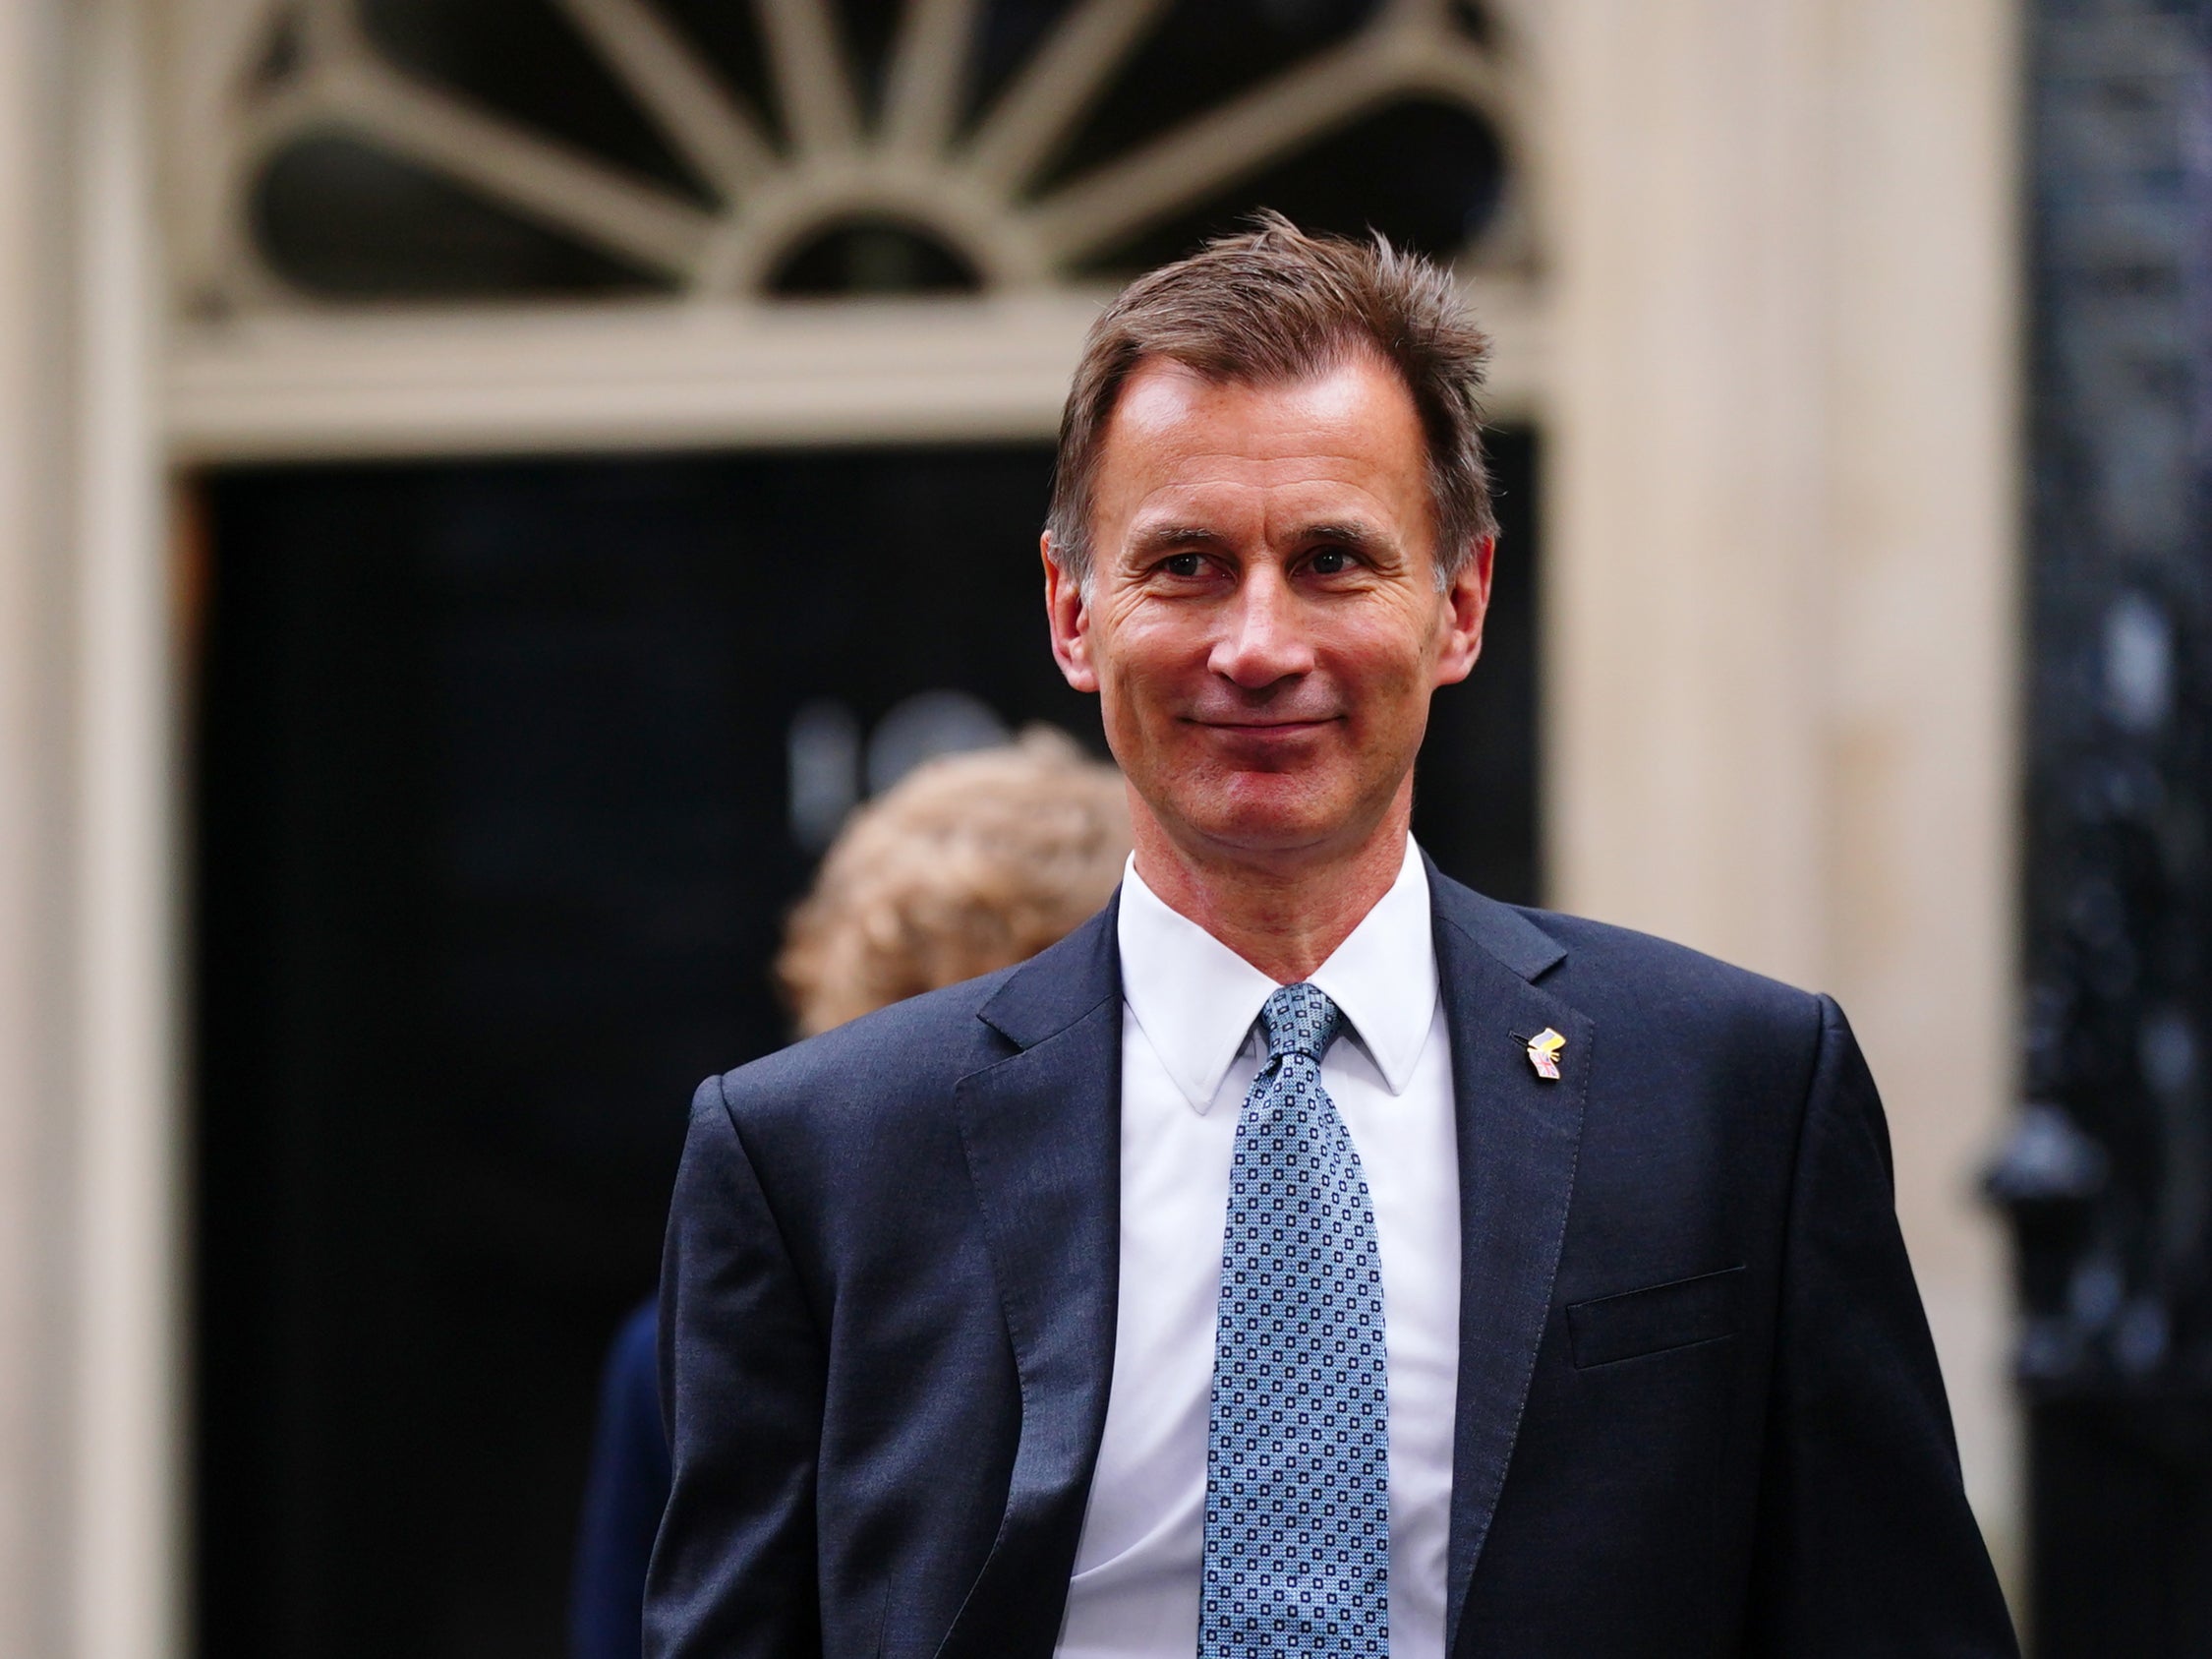 Jeremy Hunt leaves No 10 after meeting as chancellor